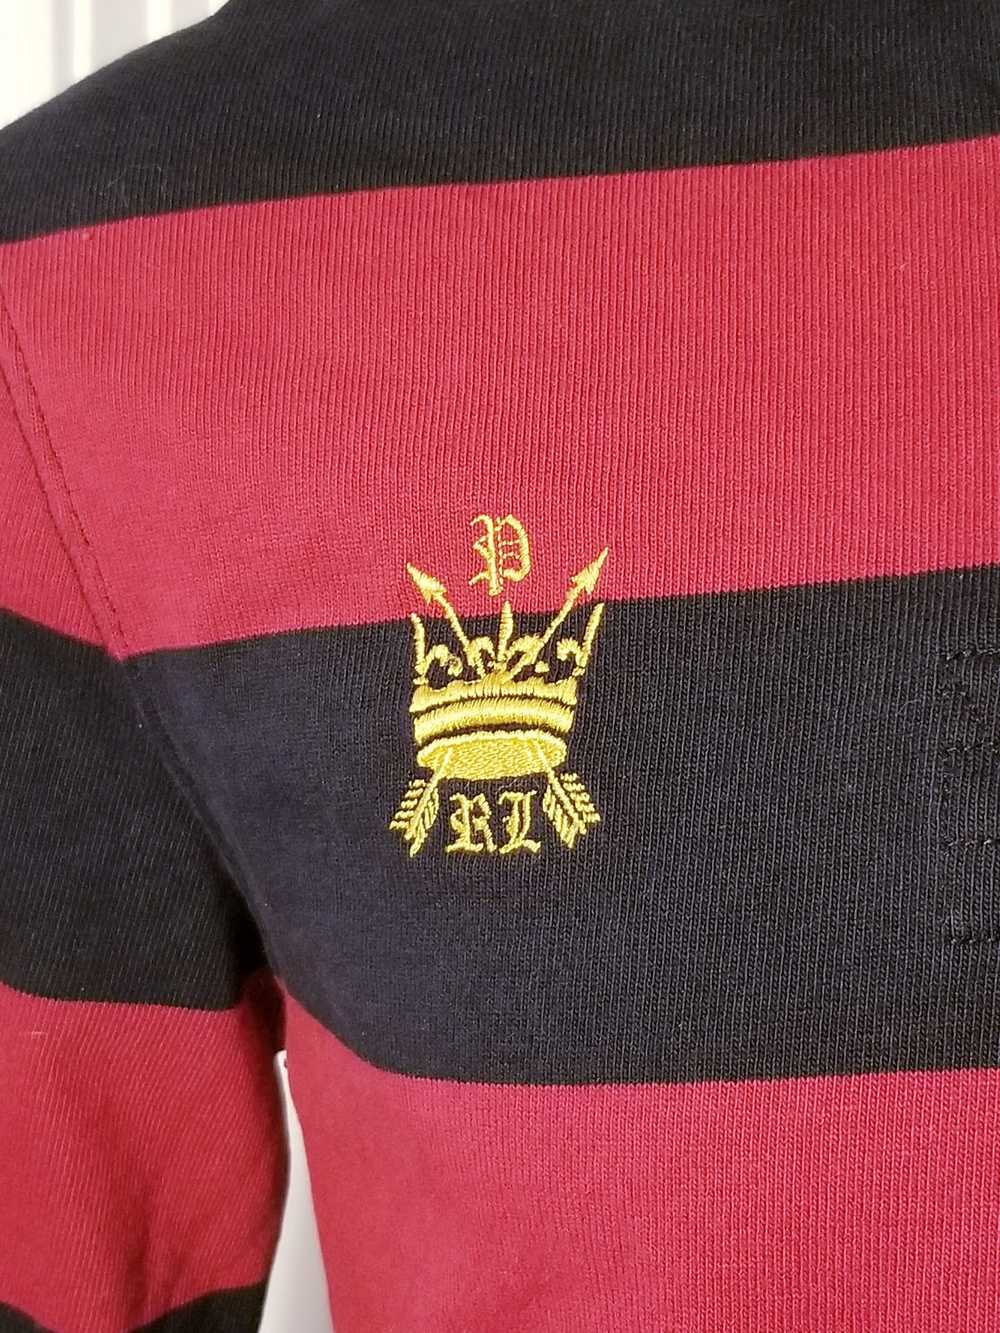 Polo Ralph Lauren rugby #5 patch vintage - image 4